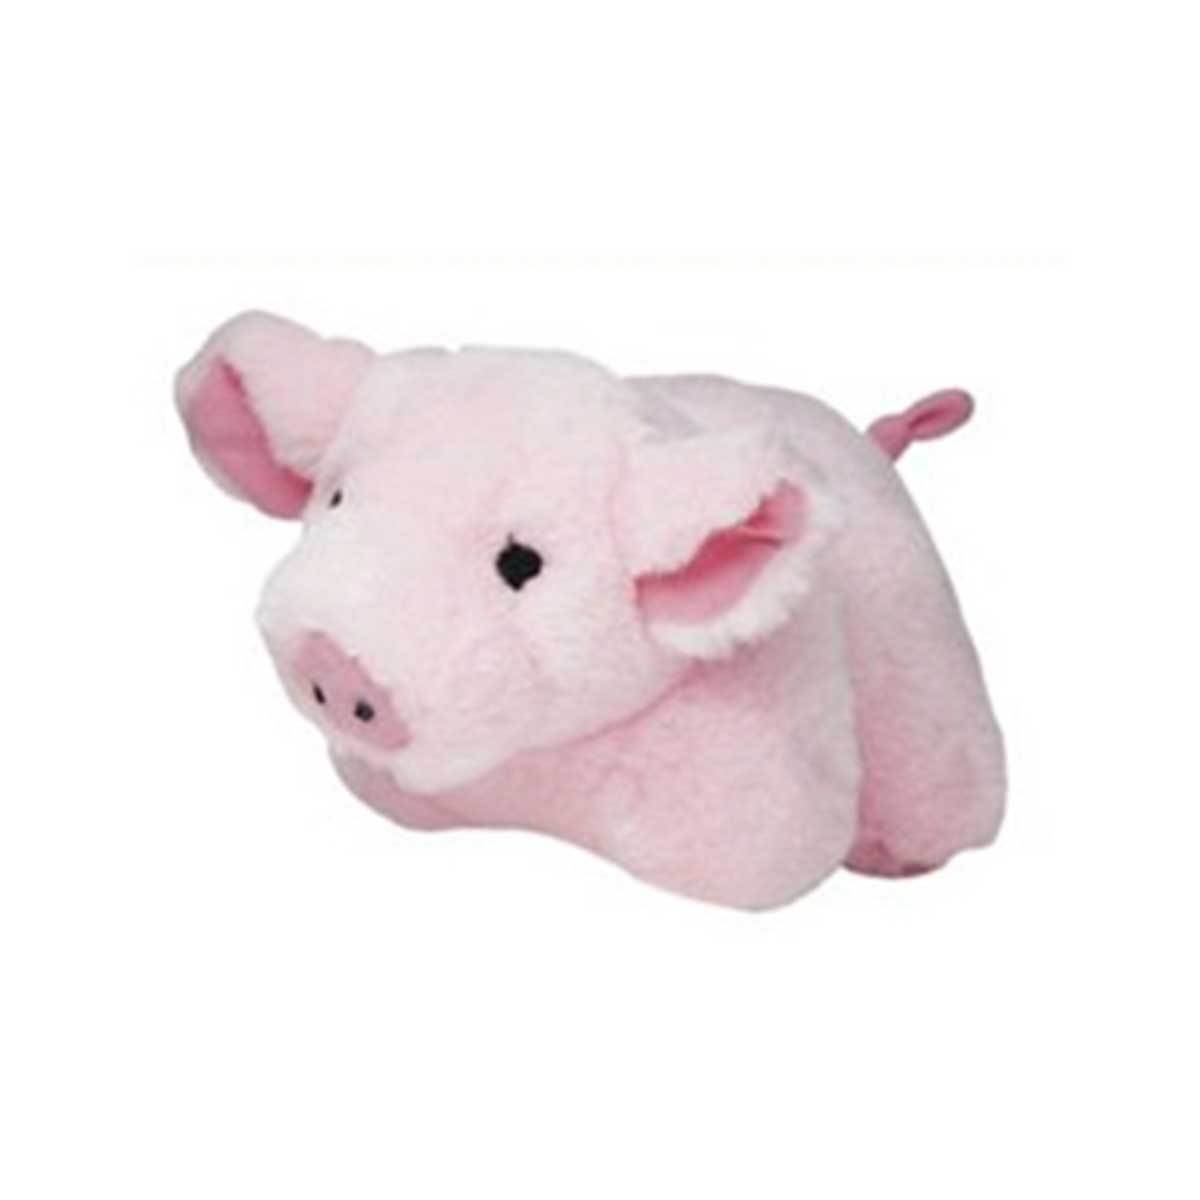 Pig Look Who's Talking Plush Dog Toy | Pawlicious & Company